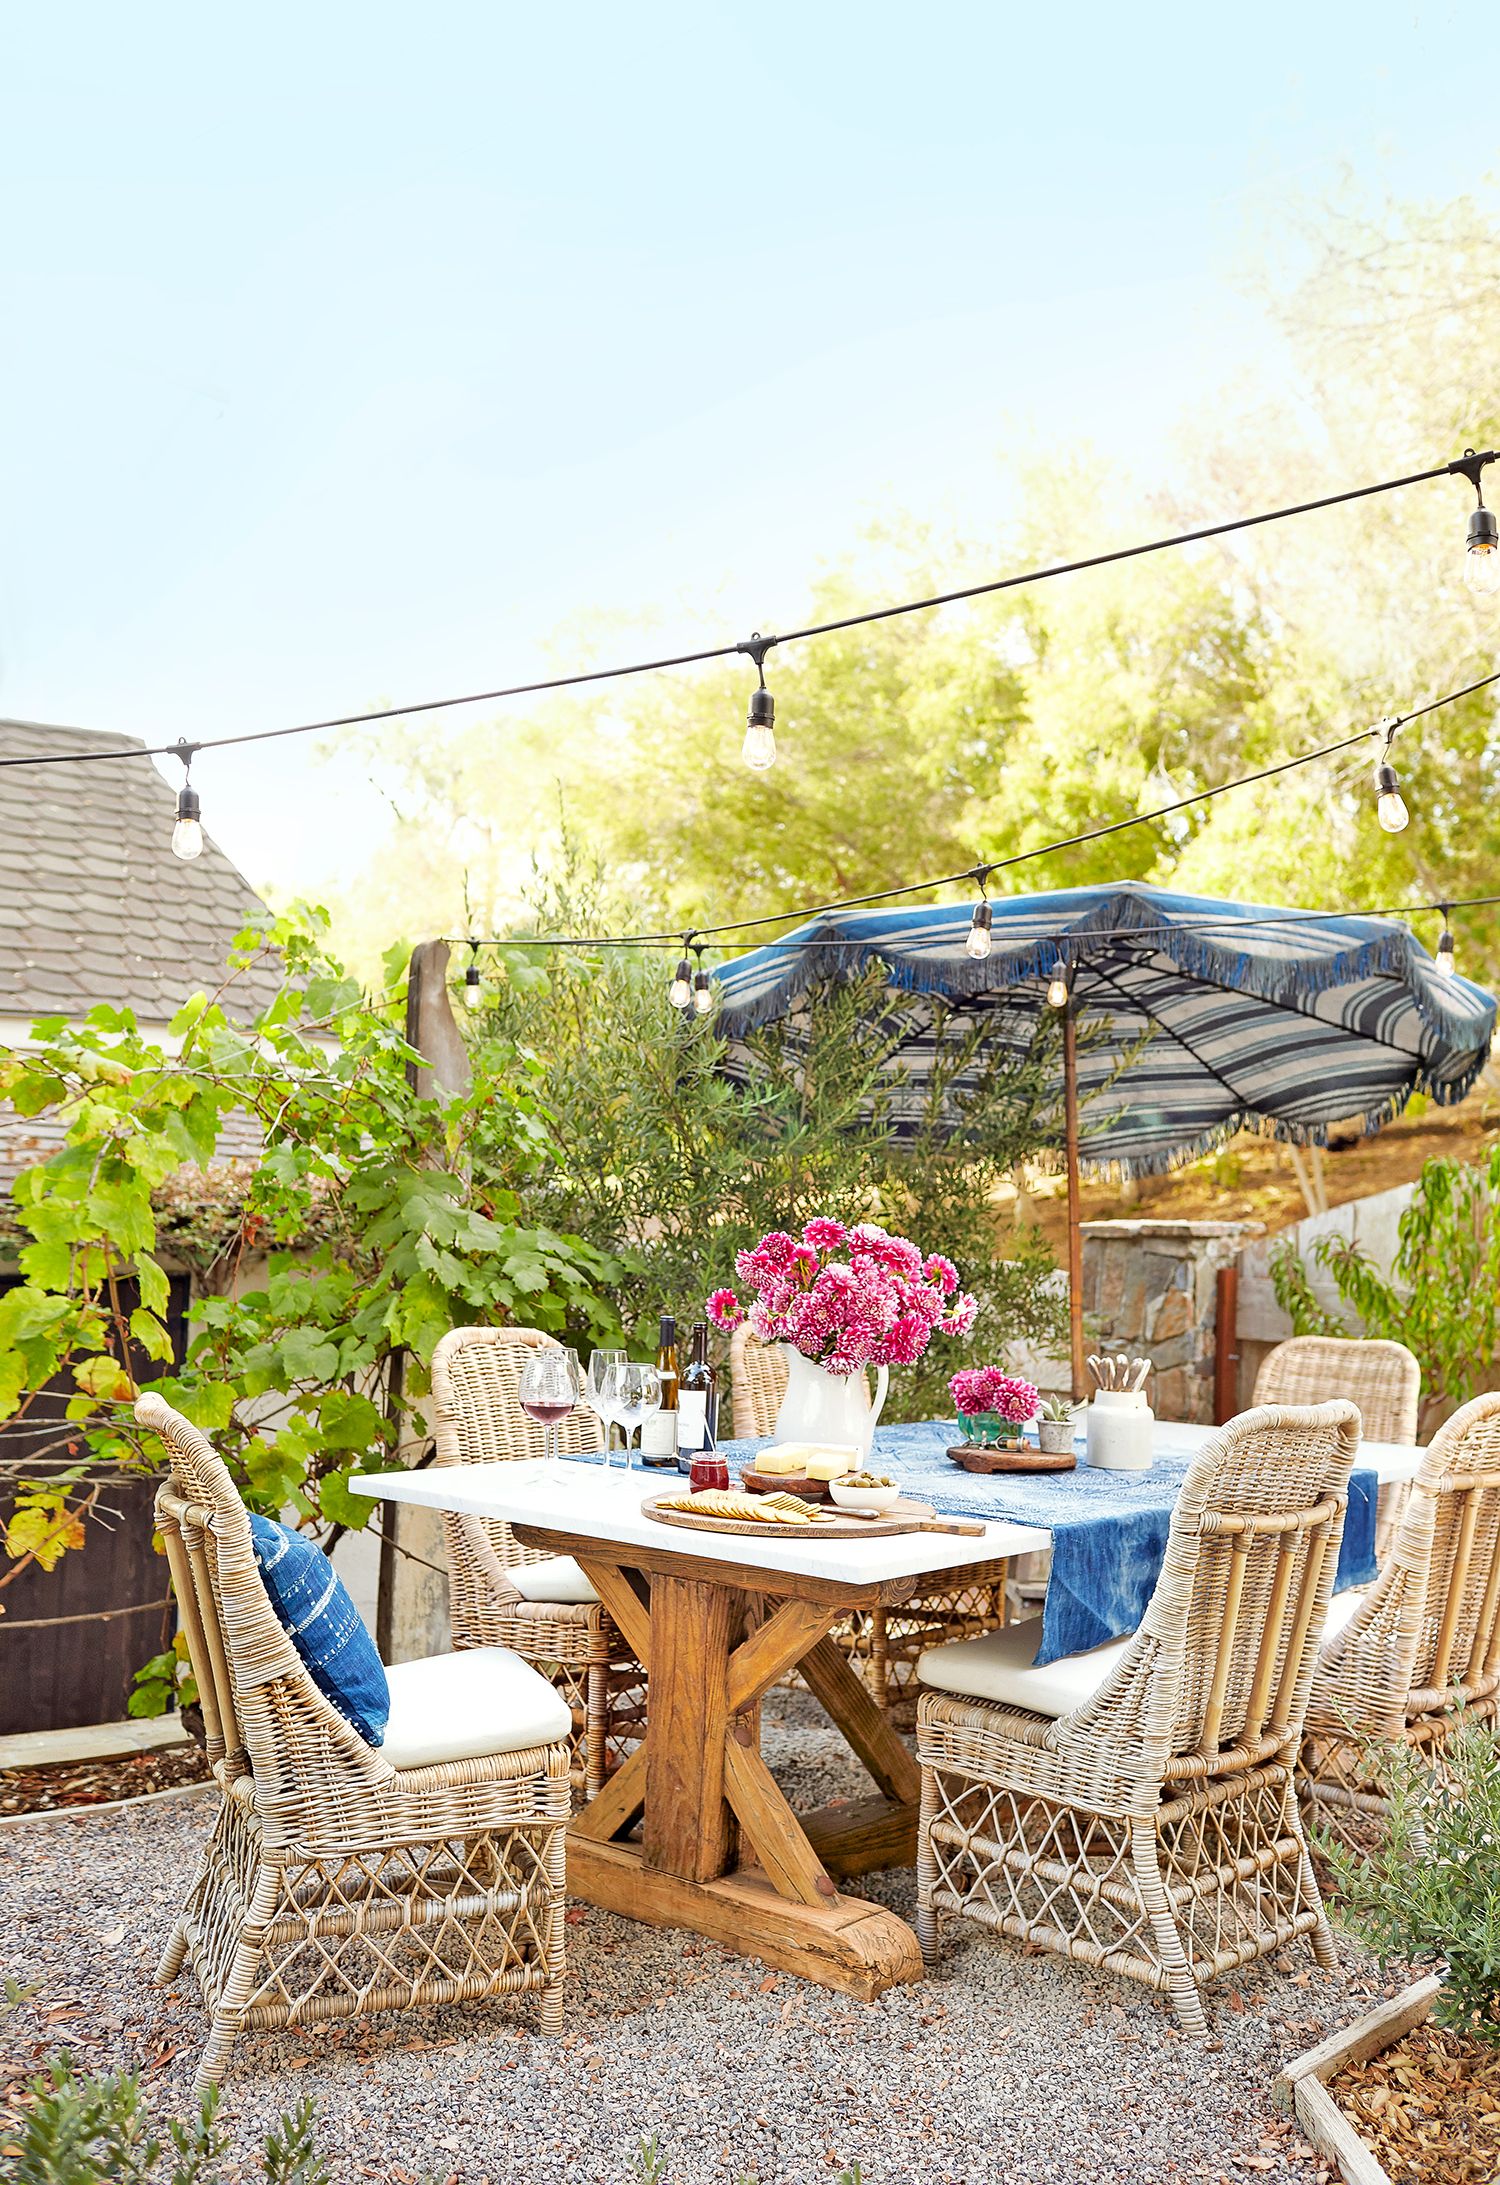 Modern Patio Furniture: 4 Inspiring Decor Ideas for Your Outdoor Space -  Laura James